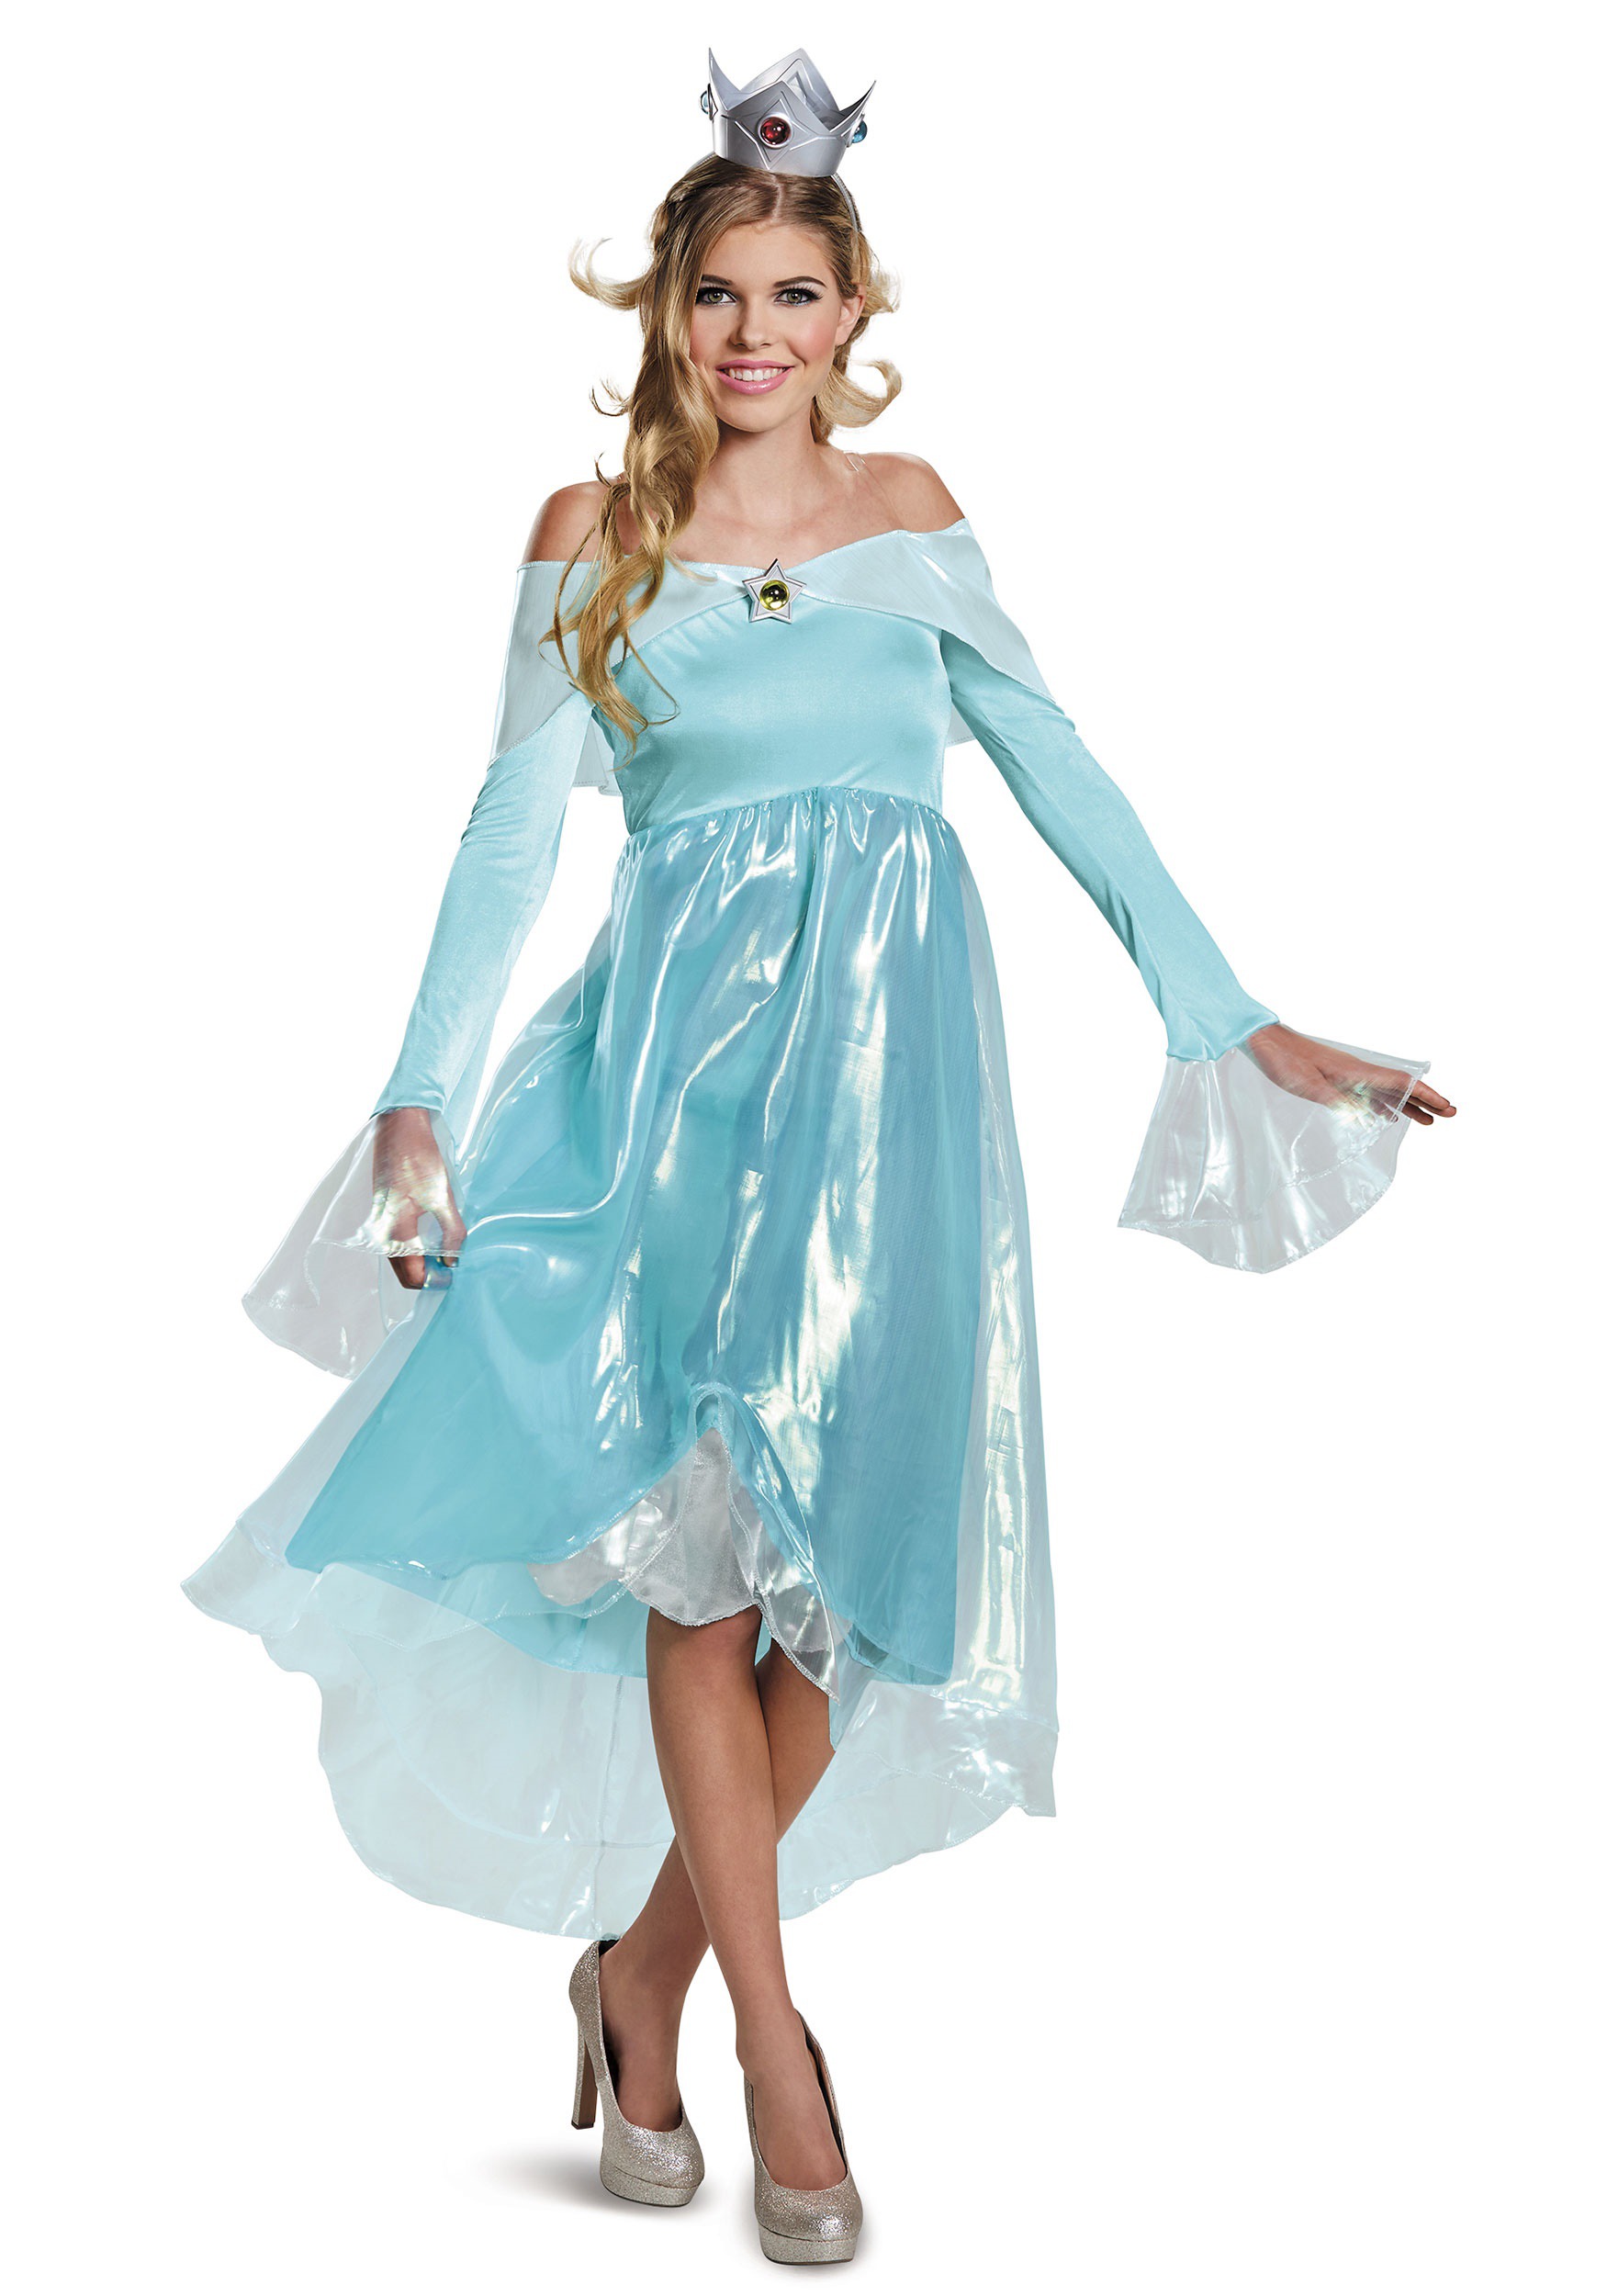 Photos - Fancy Dress MARIO Disguise Super  Rosalina Deluxe Costume for Women Blue 